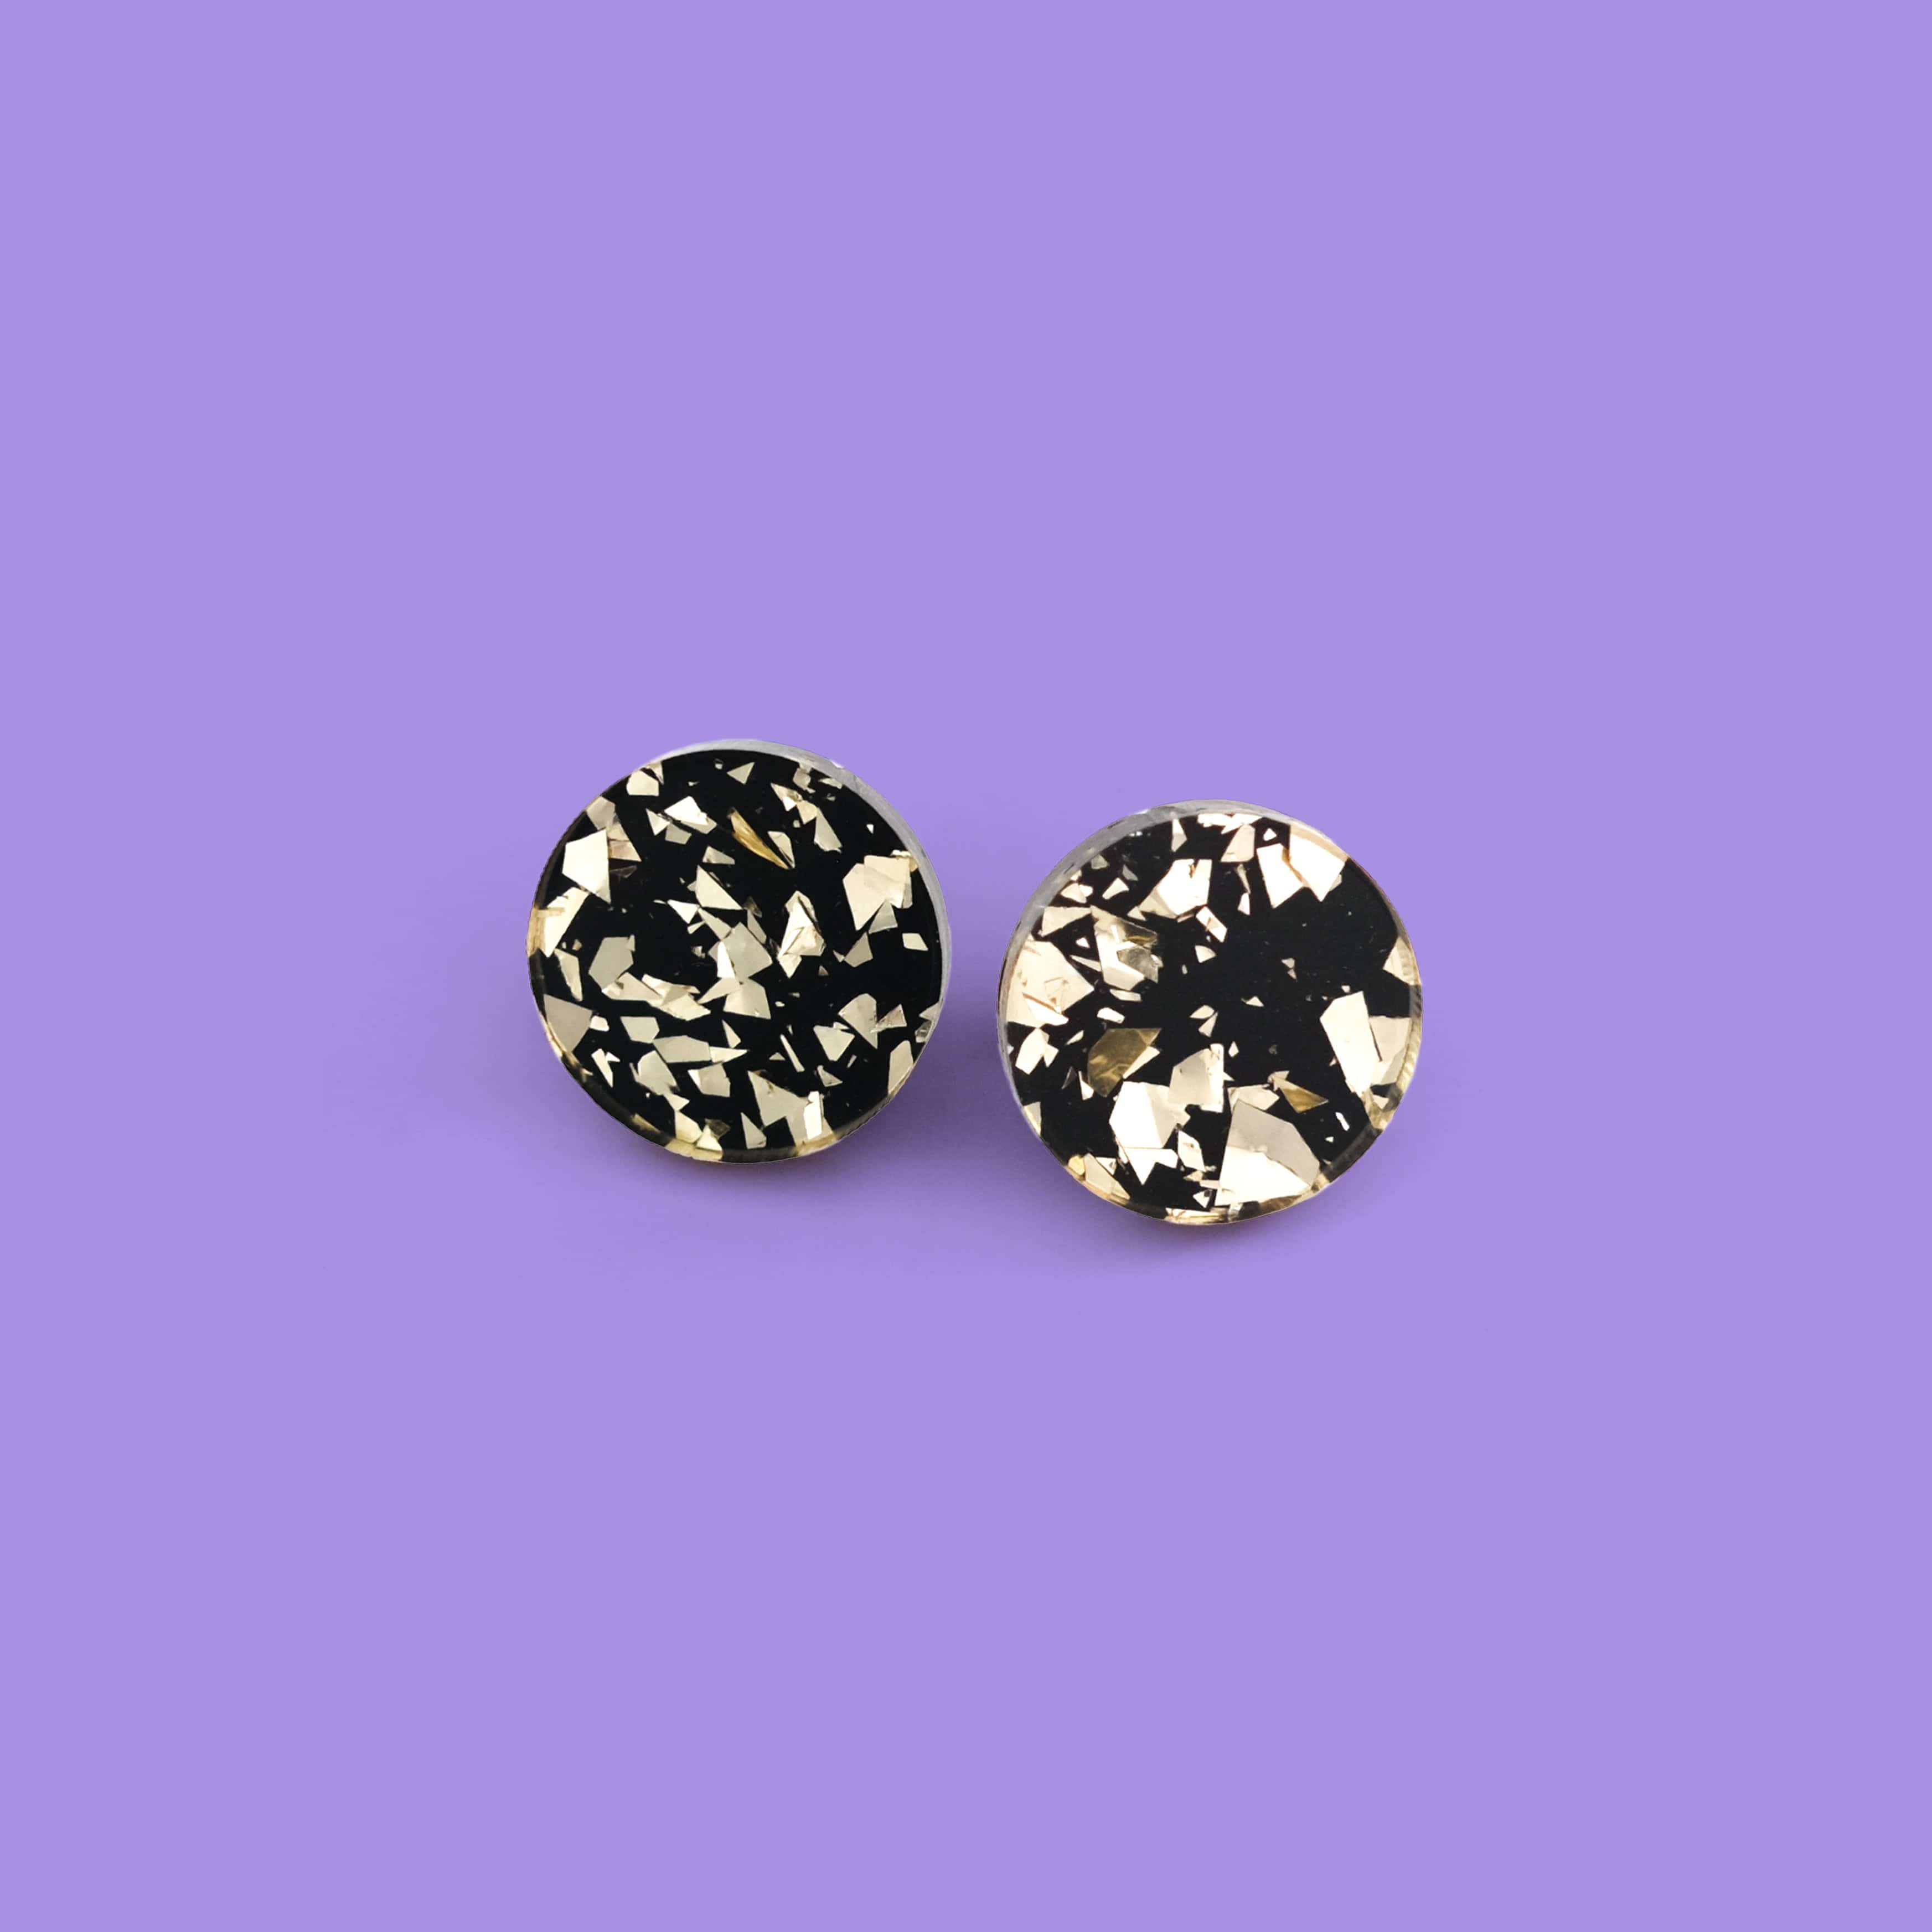 Glam and glitzy Black and Gold chunky glitter studs! 